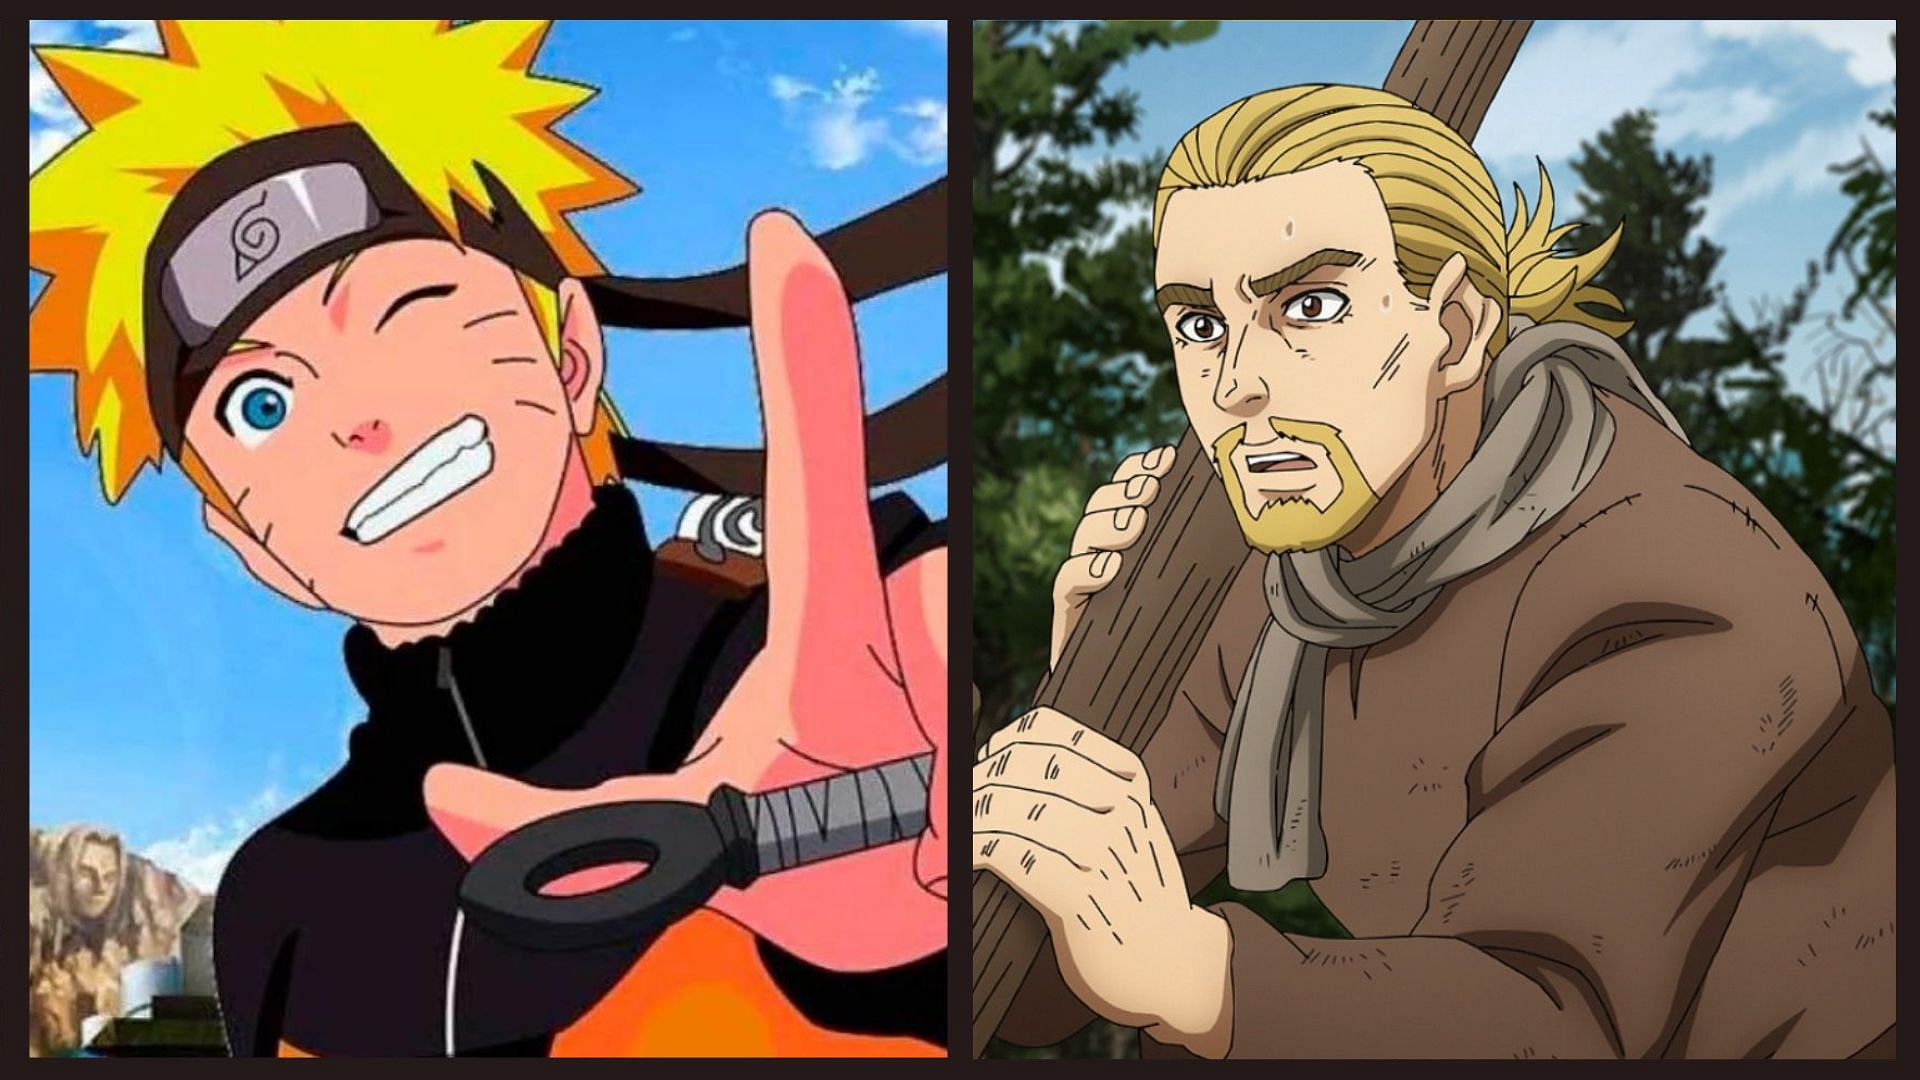 What's a better series, Vinland Saga or Naruto? - Quora